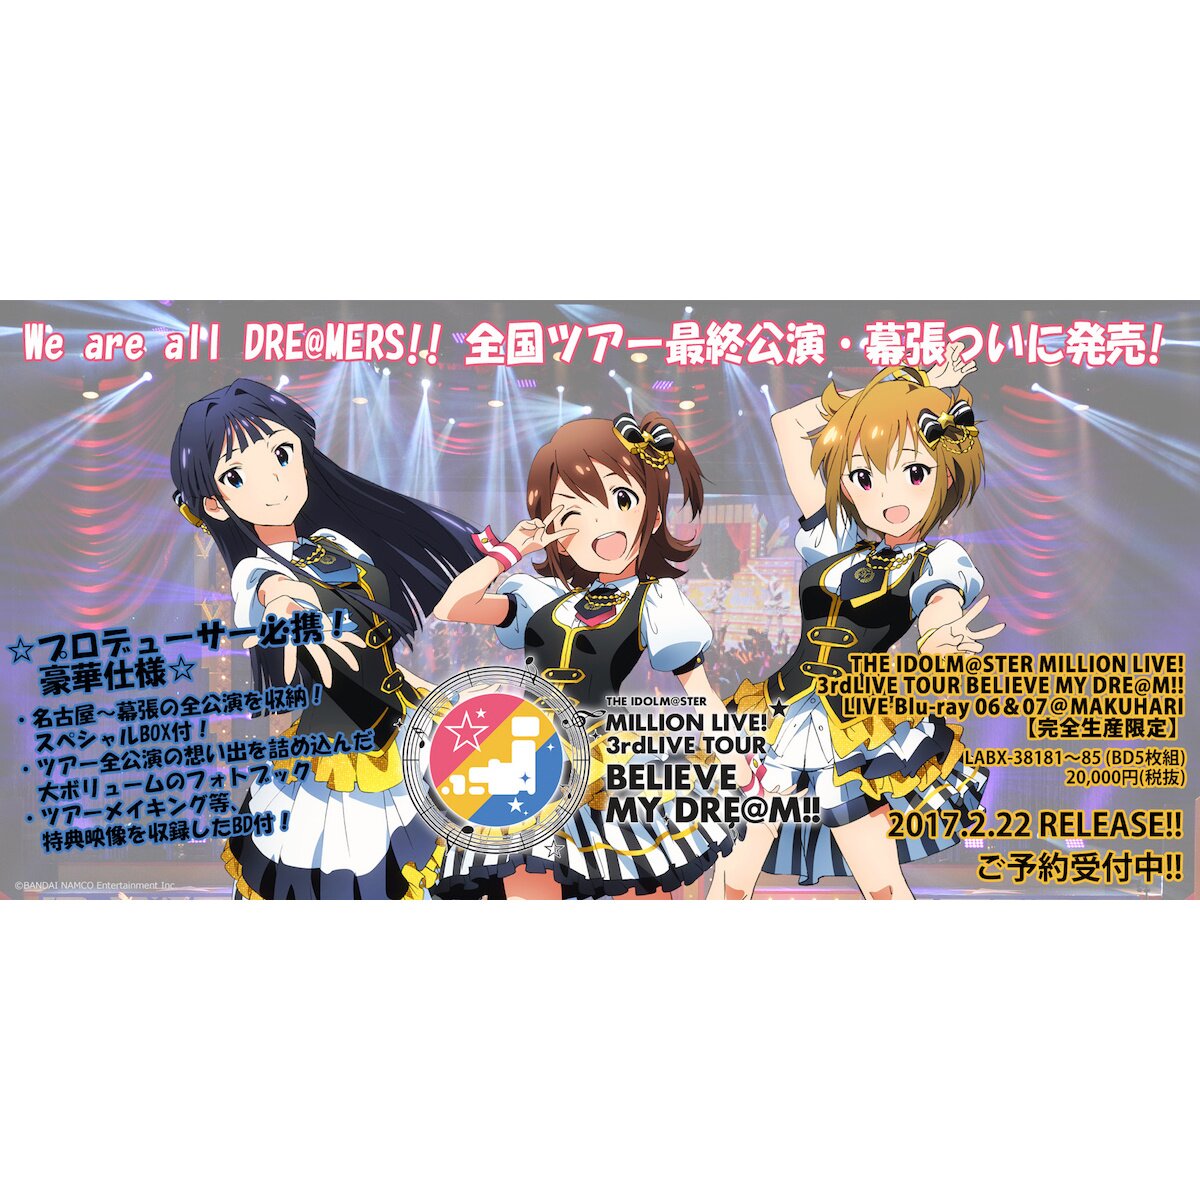 THE IDOLM@STER MILLION LIVE!3rdLIVE TOUR-